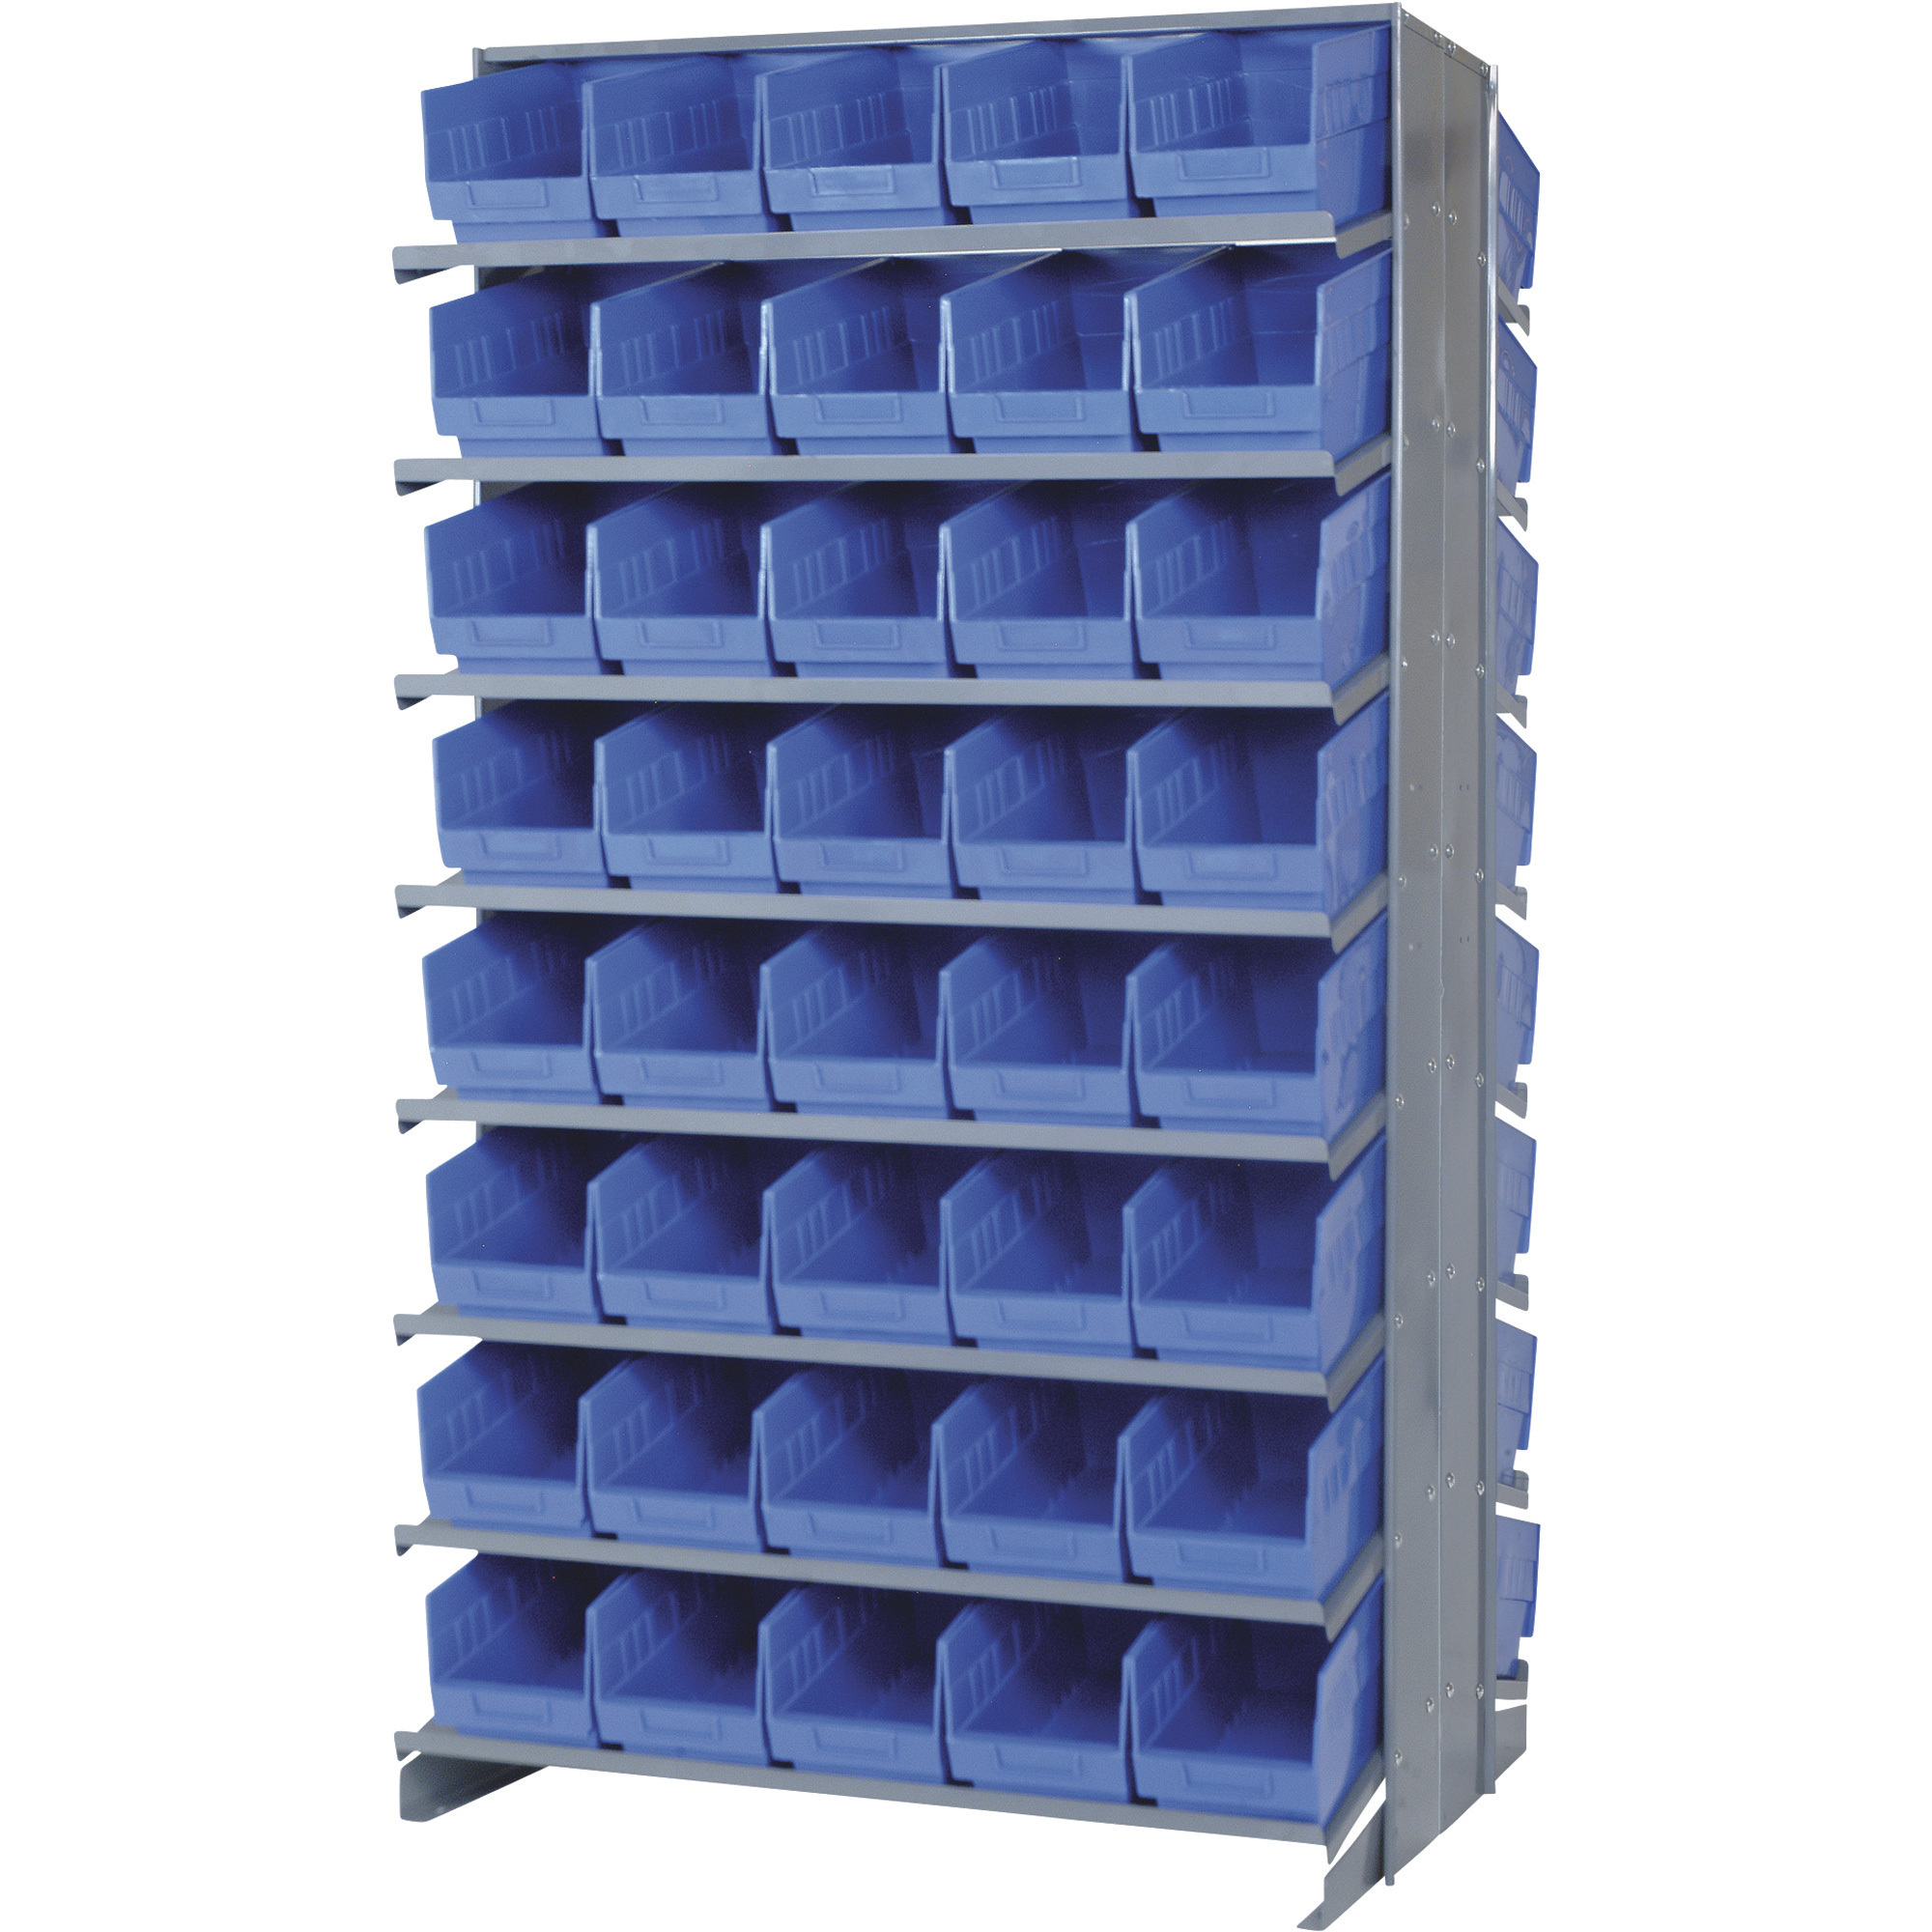 Quantum Double-Sided Store-More Pick Rack Shelf with Bins, 36Inch W x 24Inch D x 63 1/2Inch H, Includes 80 11 5/8Inch L x 6 5/8Inch W x 6Inch H Bins,